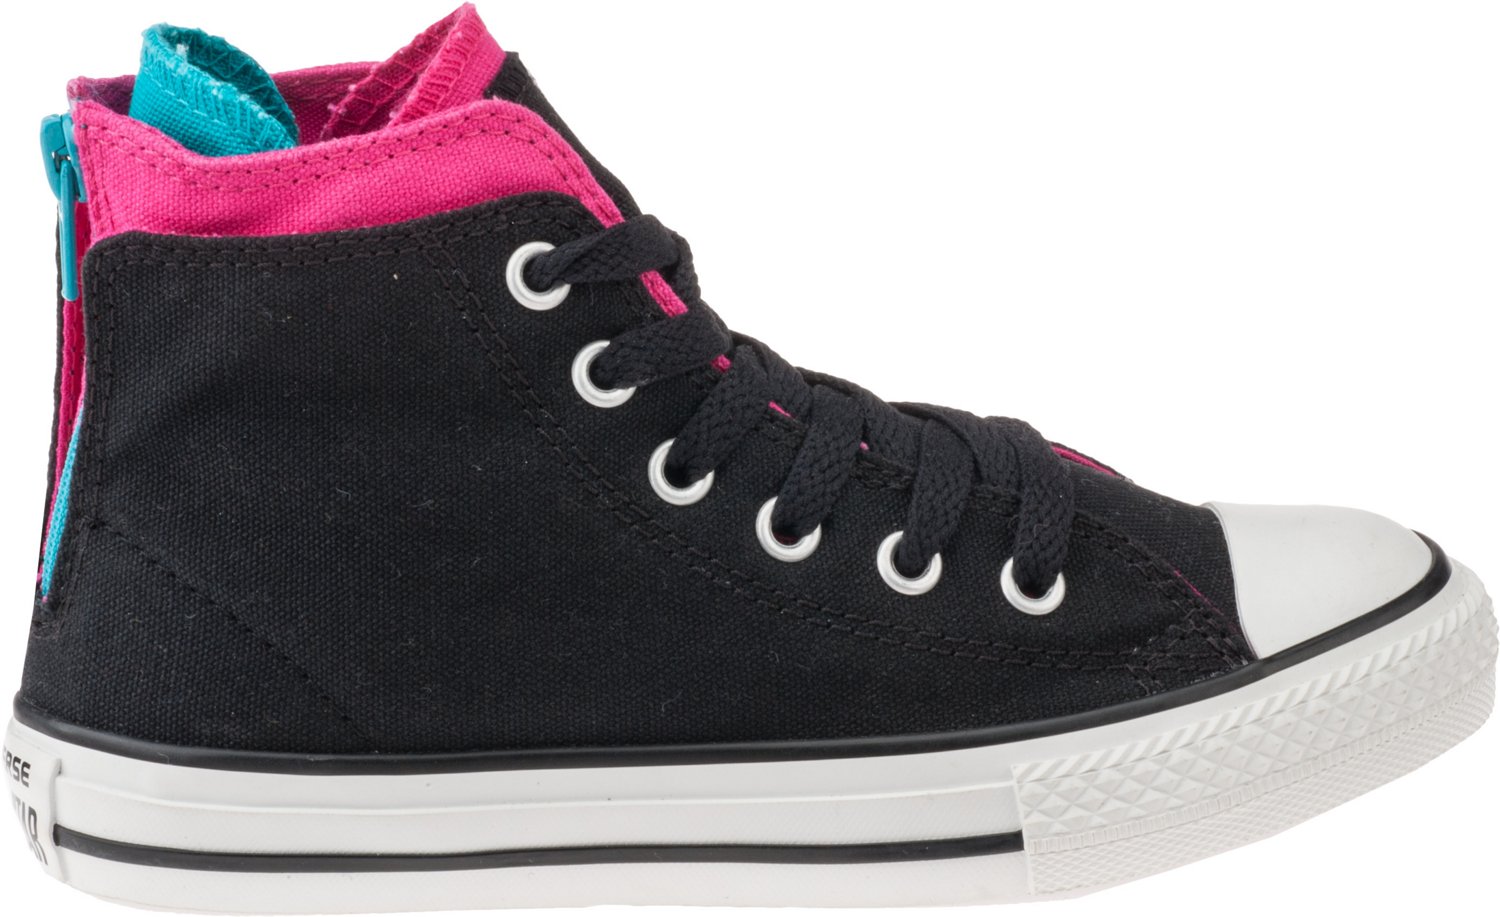 Academy - Converse Girls' Chuck Taylor Zip-Back Athletic Lifestyle ...